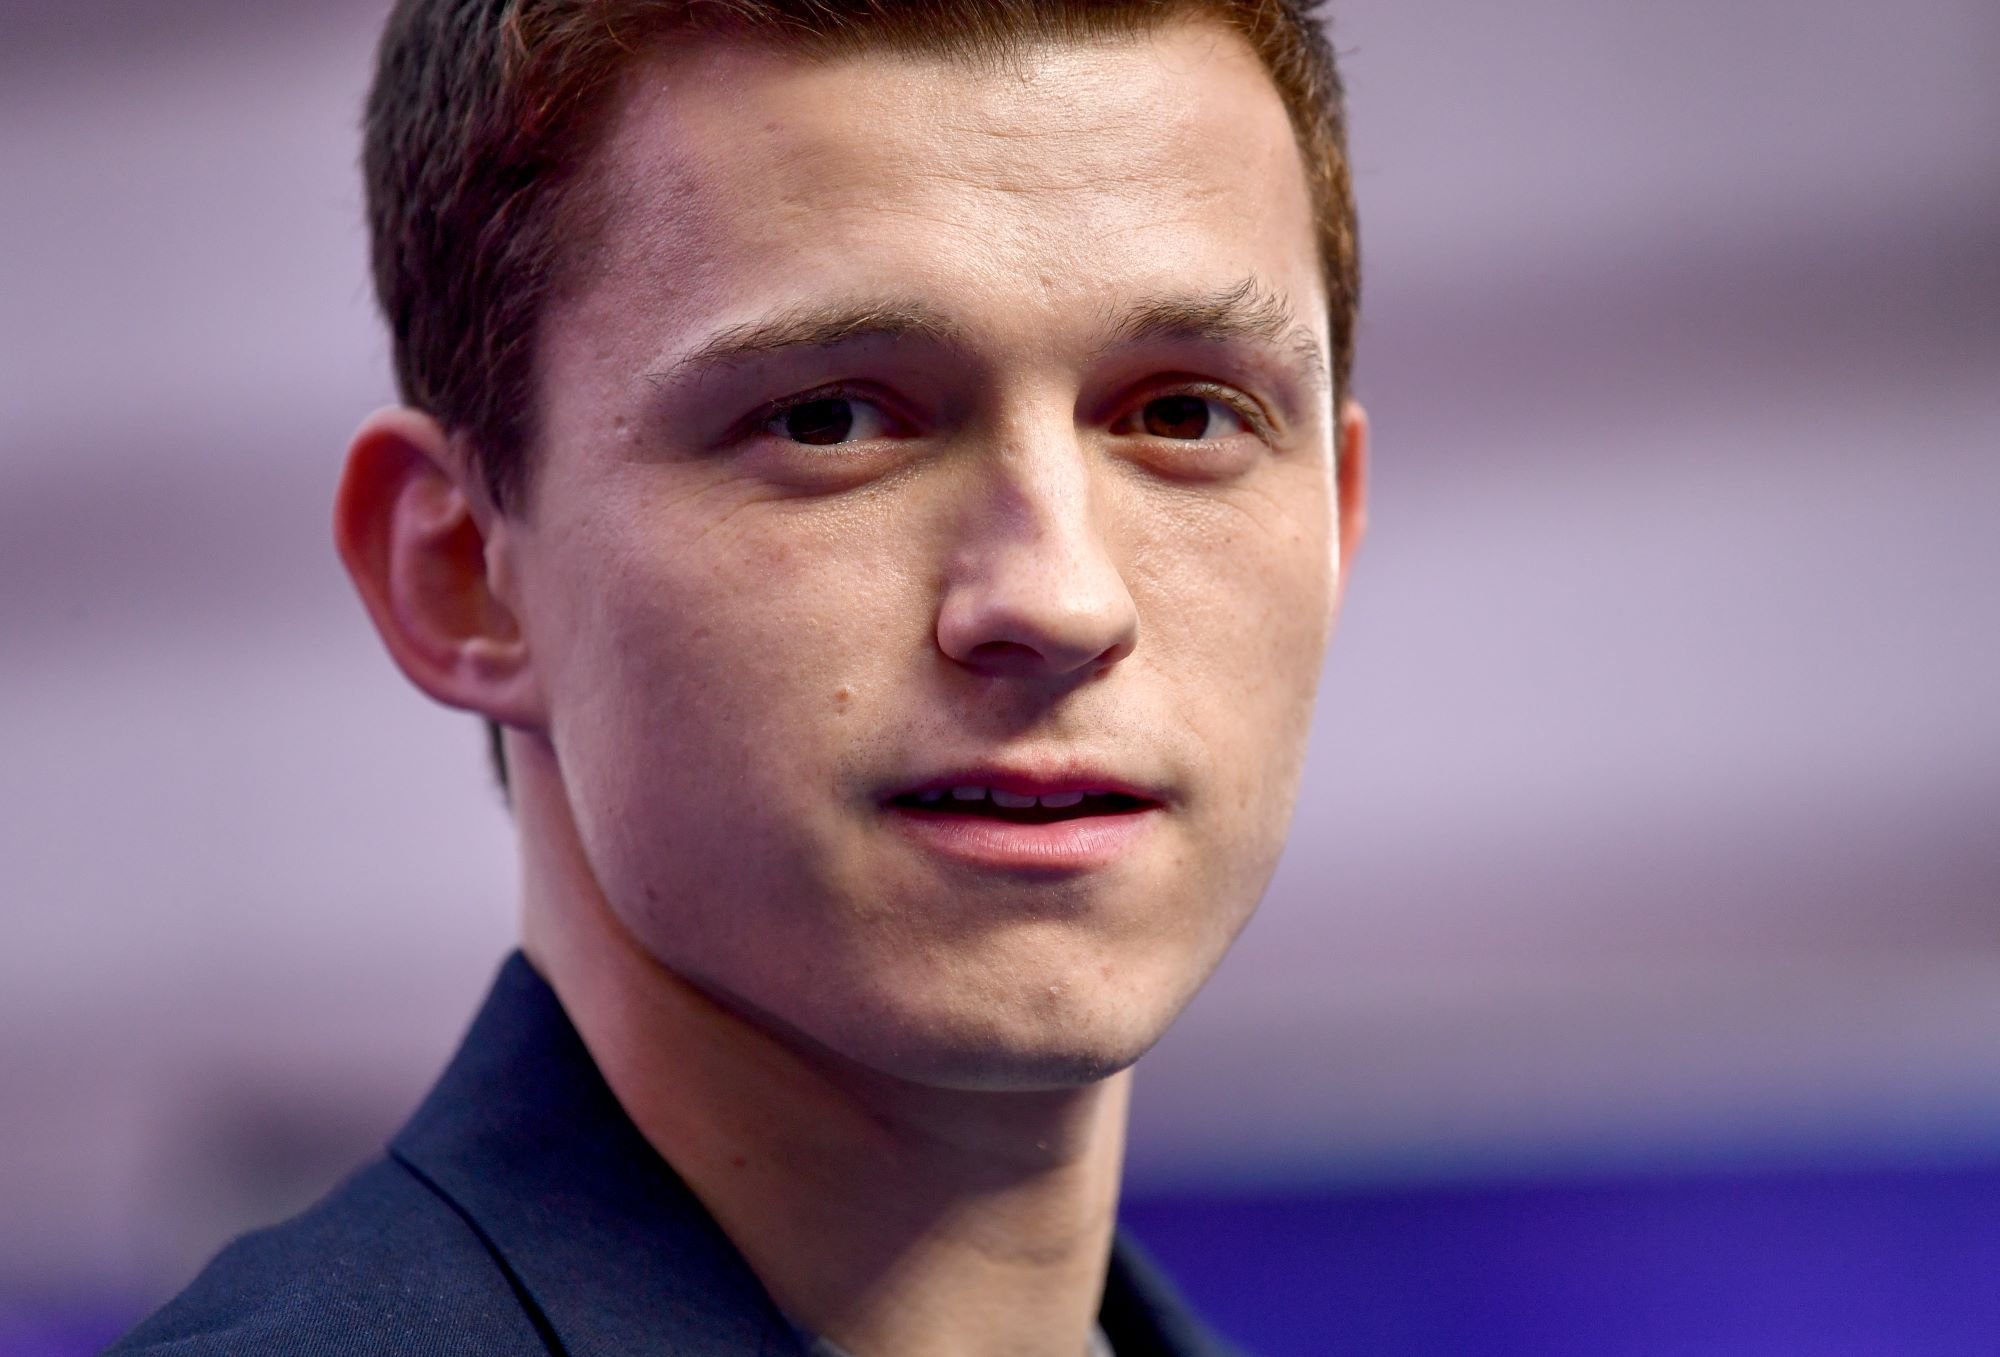 Will ‘Spider-Man: No Way Home’ Be Tom Holland’s Last Movie as Peter Parker?